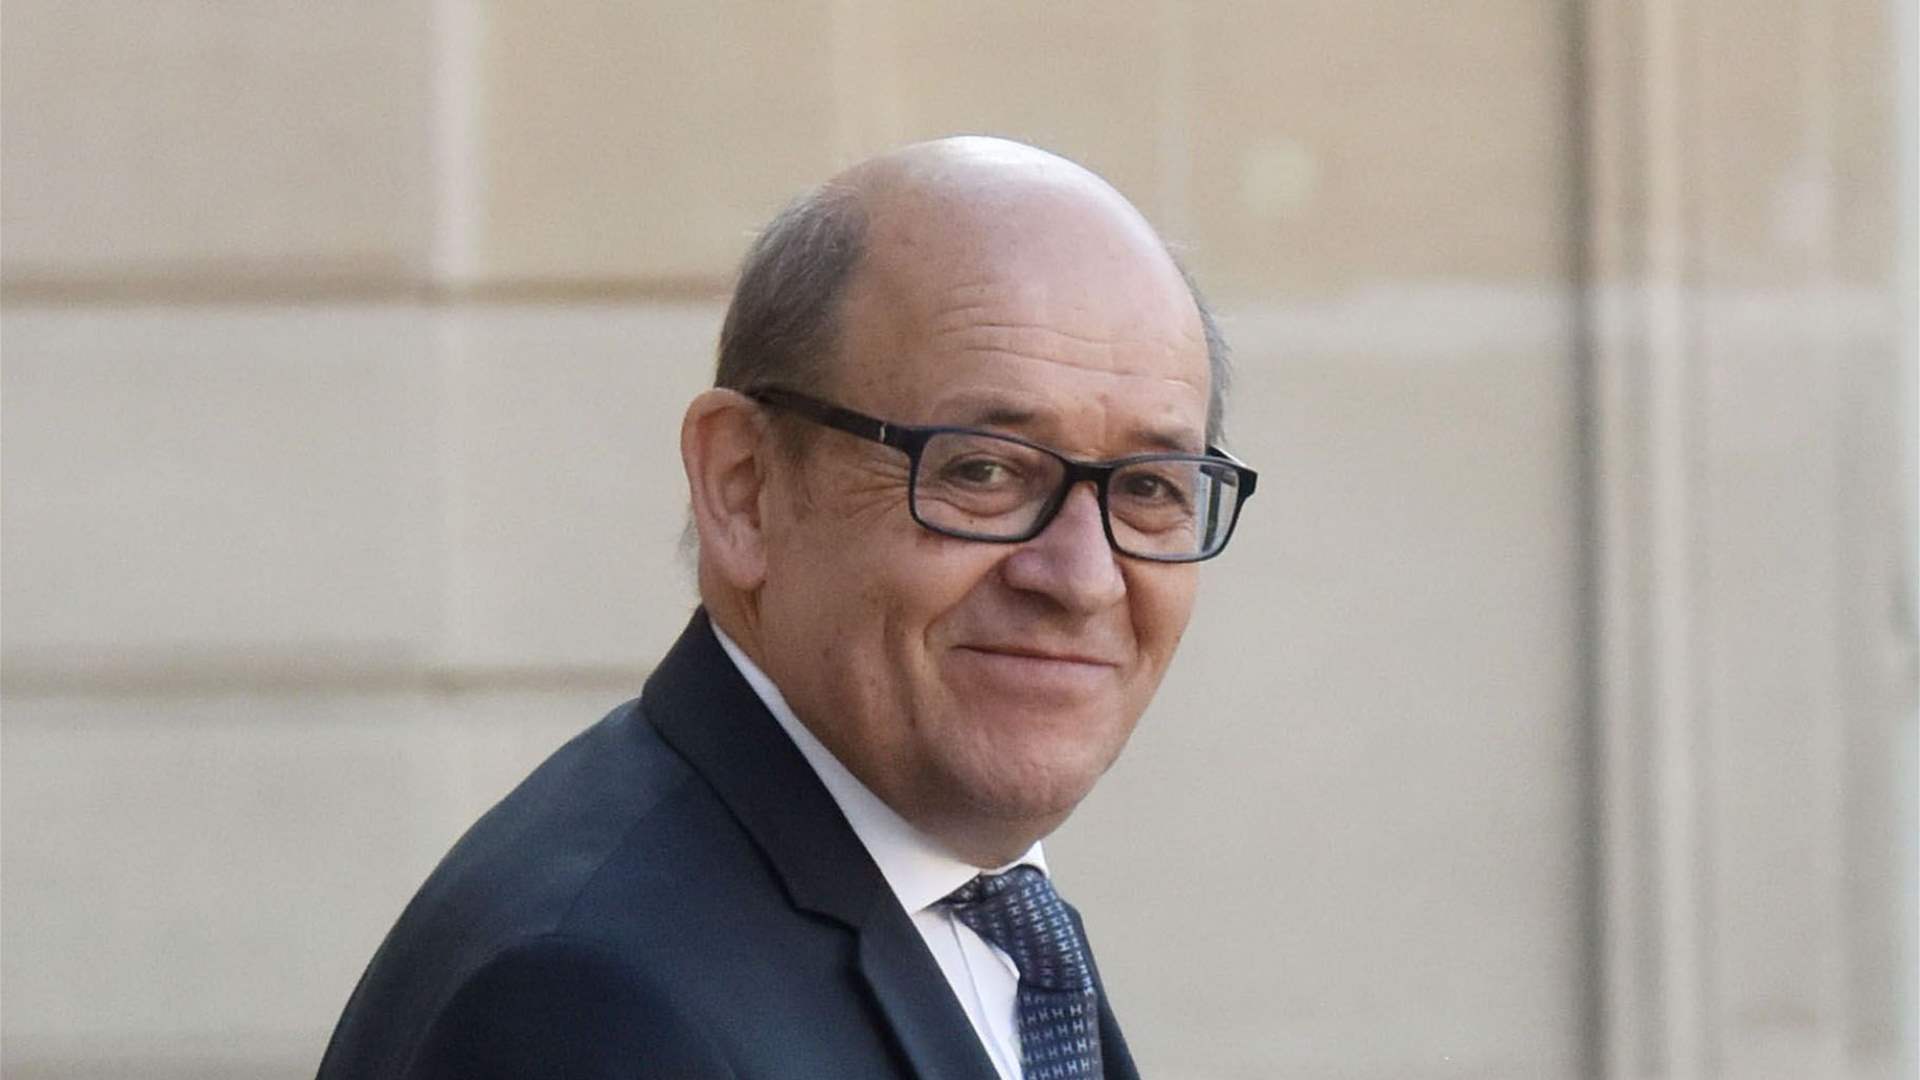 Political disputes and electoral hopes: Parties await French envoy&#39;s return